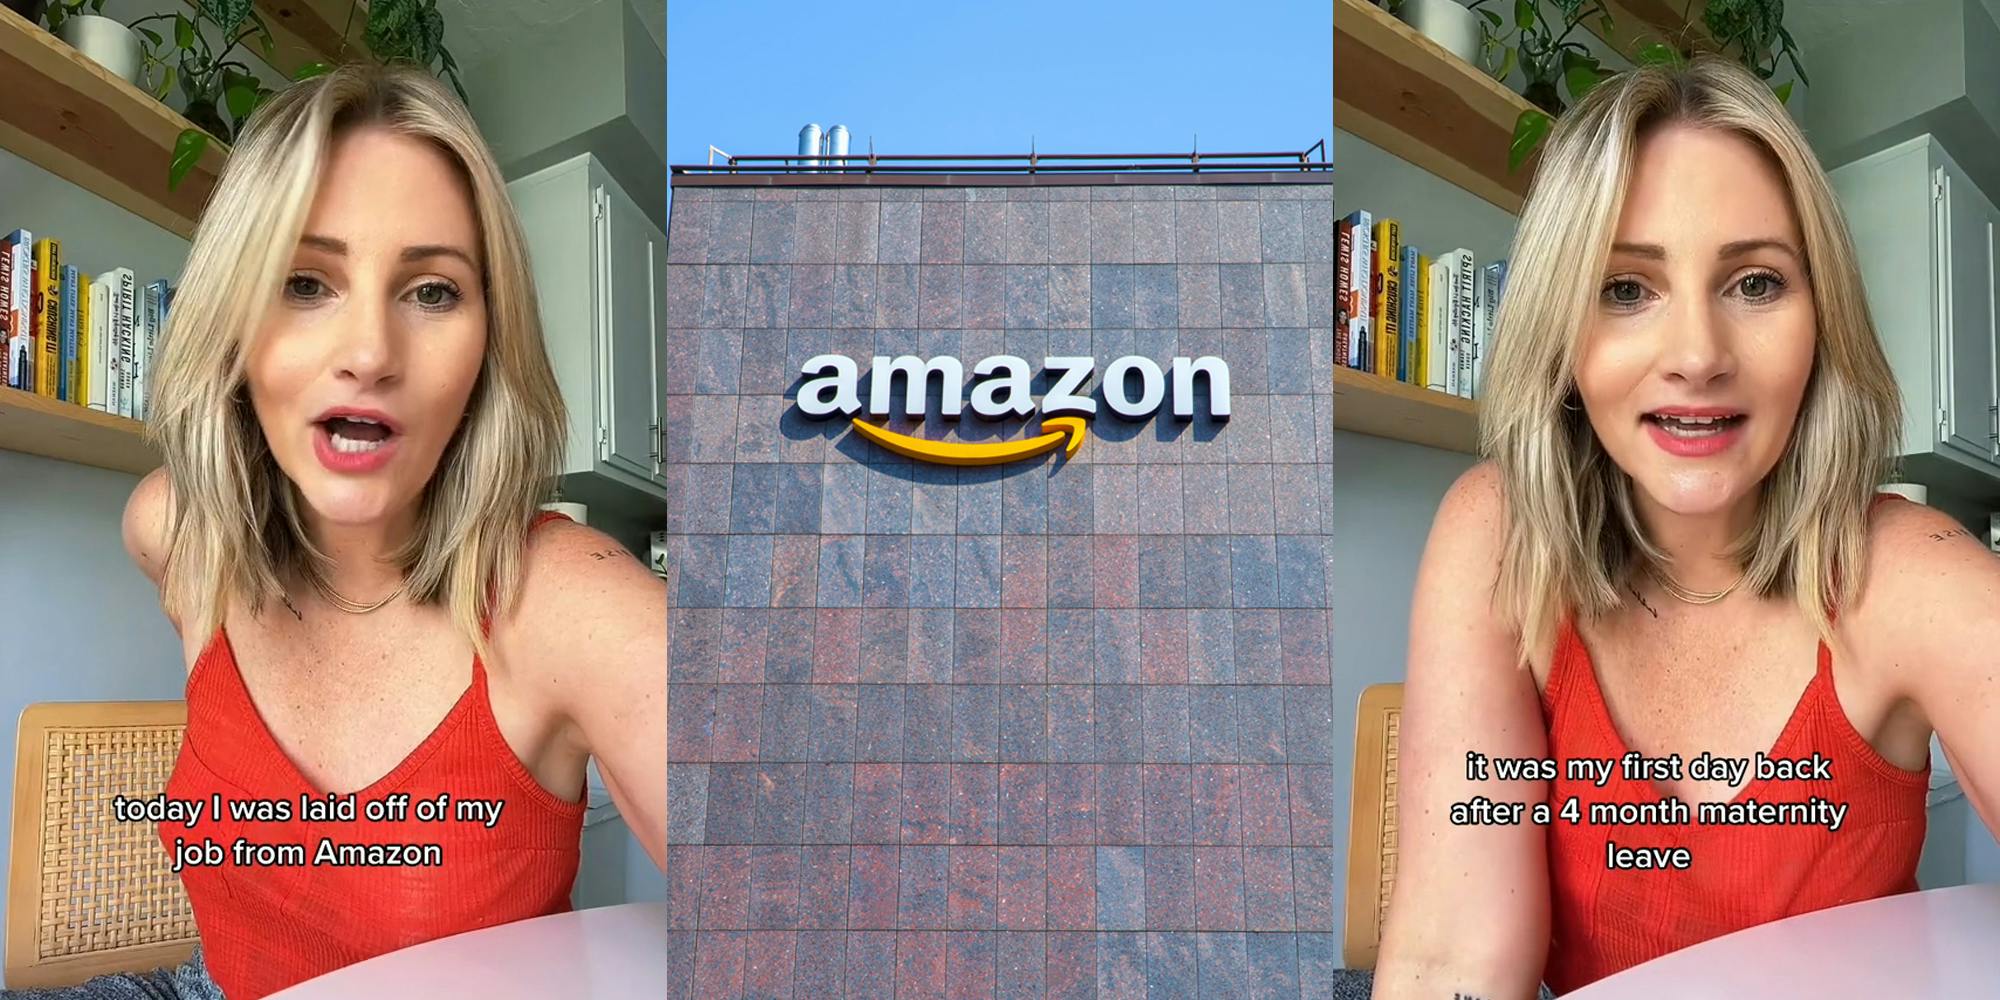 former Amazon employee speaking with caption "today I was laid off of my job from Amazon" (l) Amazon sign on building with blue sky (c) former Amazon employee speaking with caption "it was my first day back after a 4 month maternity leave" (r)